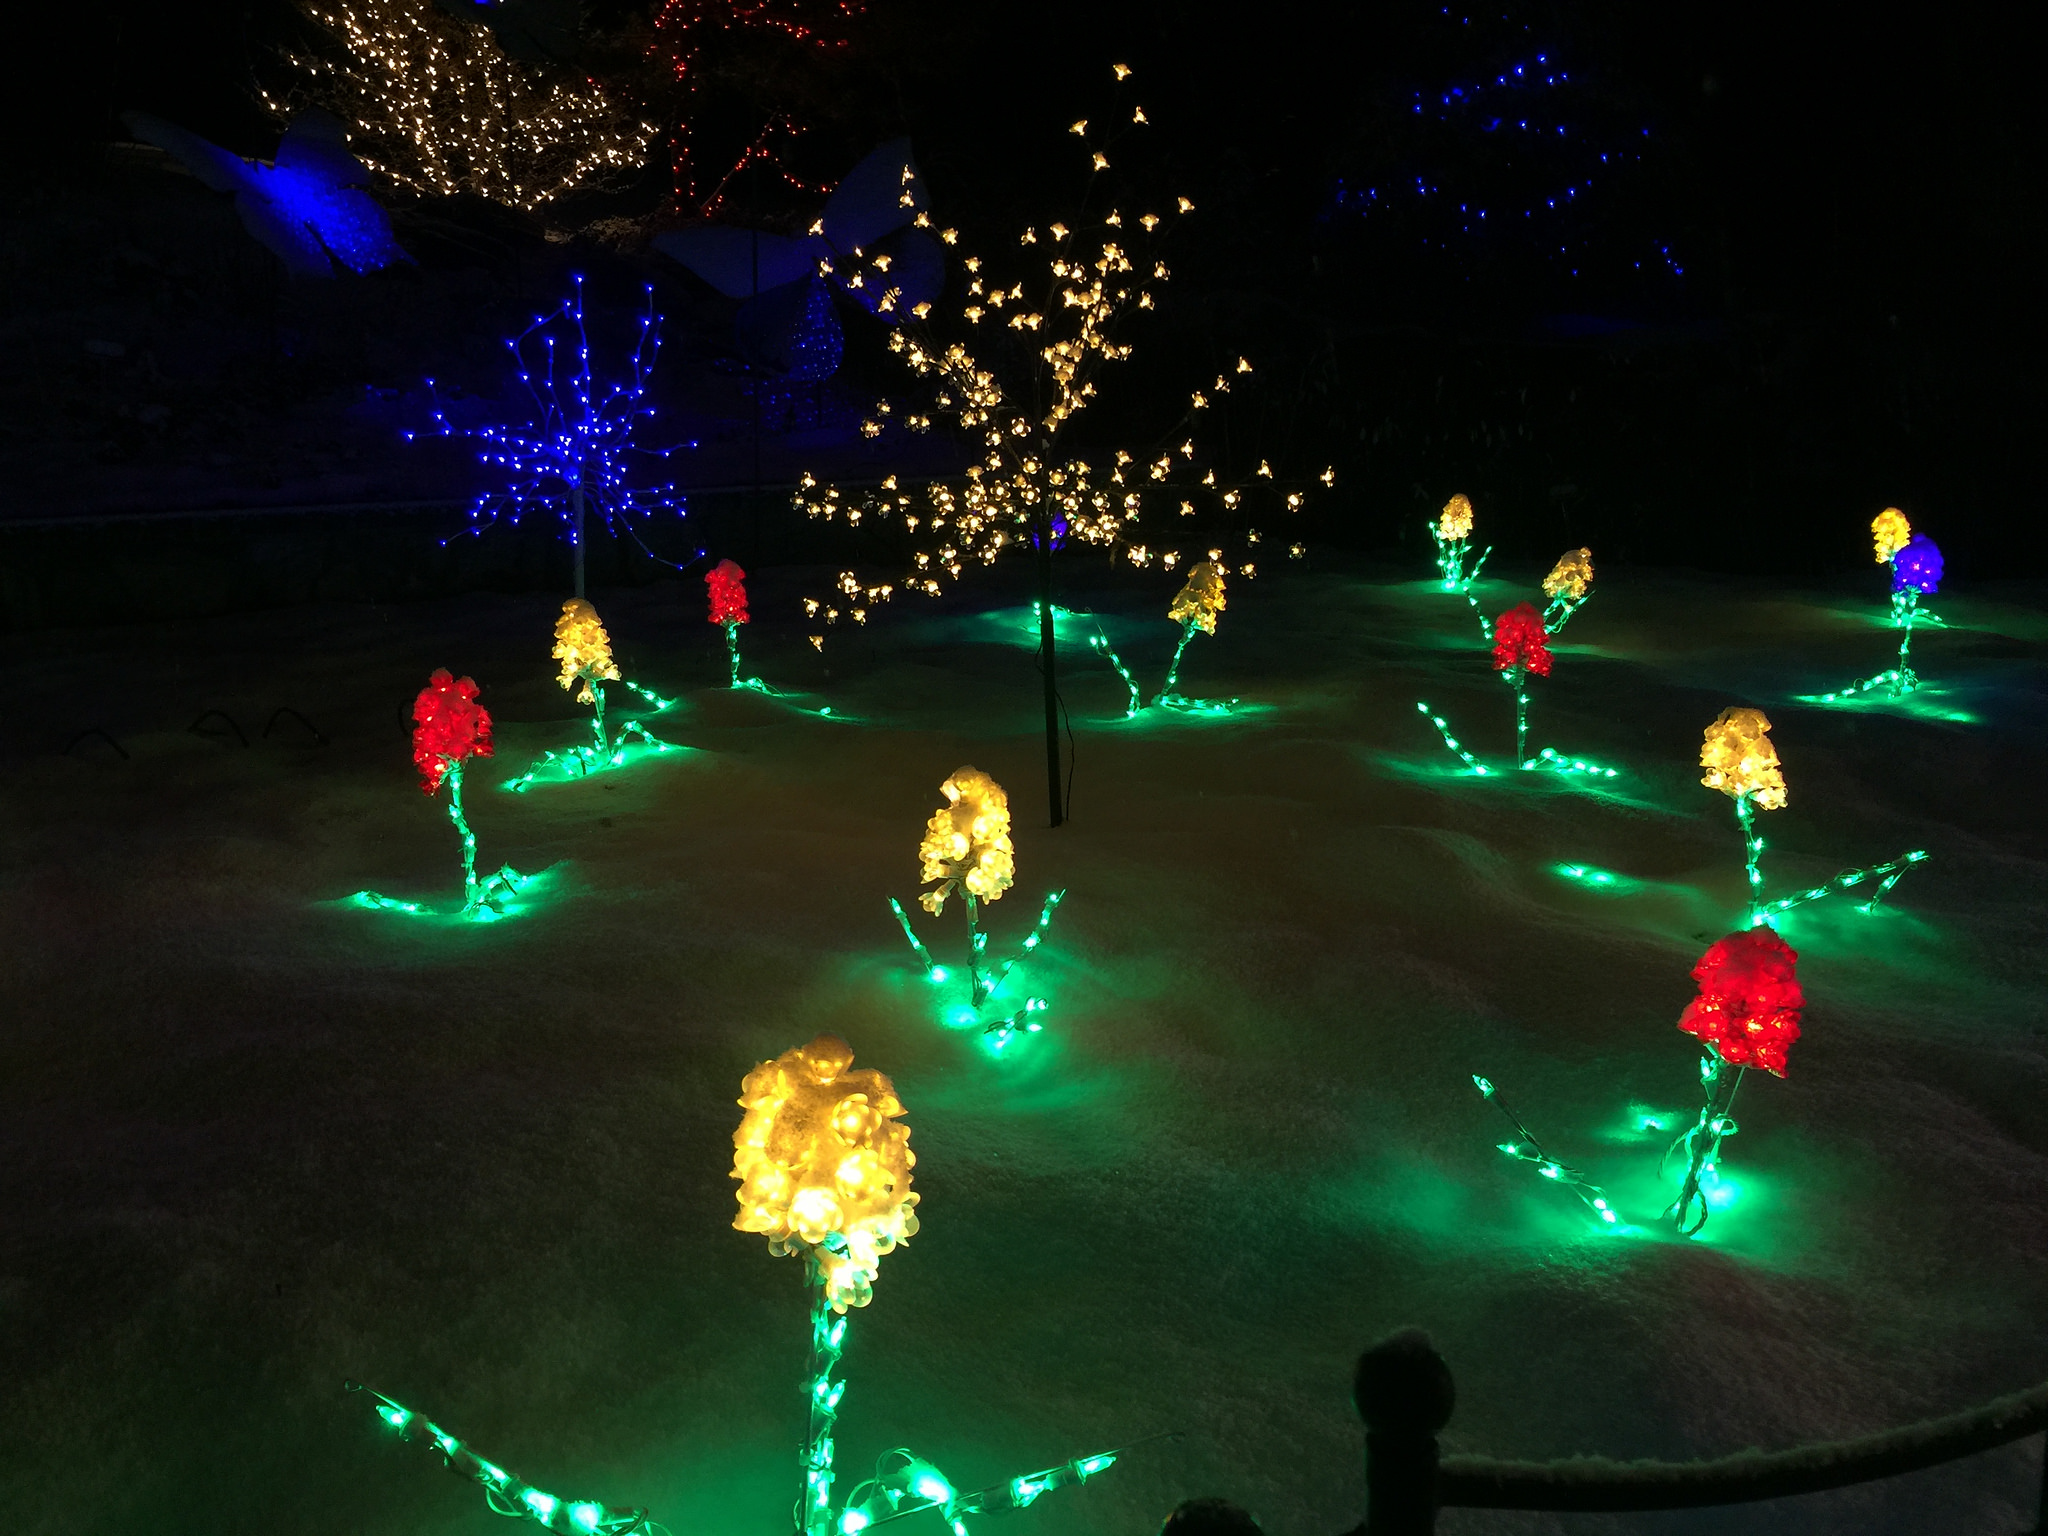 Brookside Gardens Light Display In Wheaton In Its 20th Year